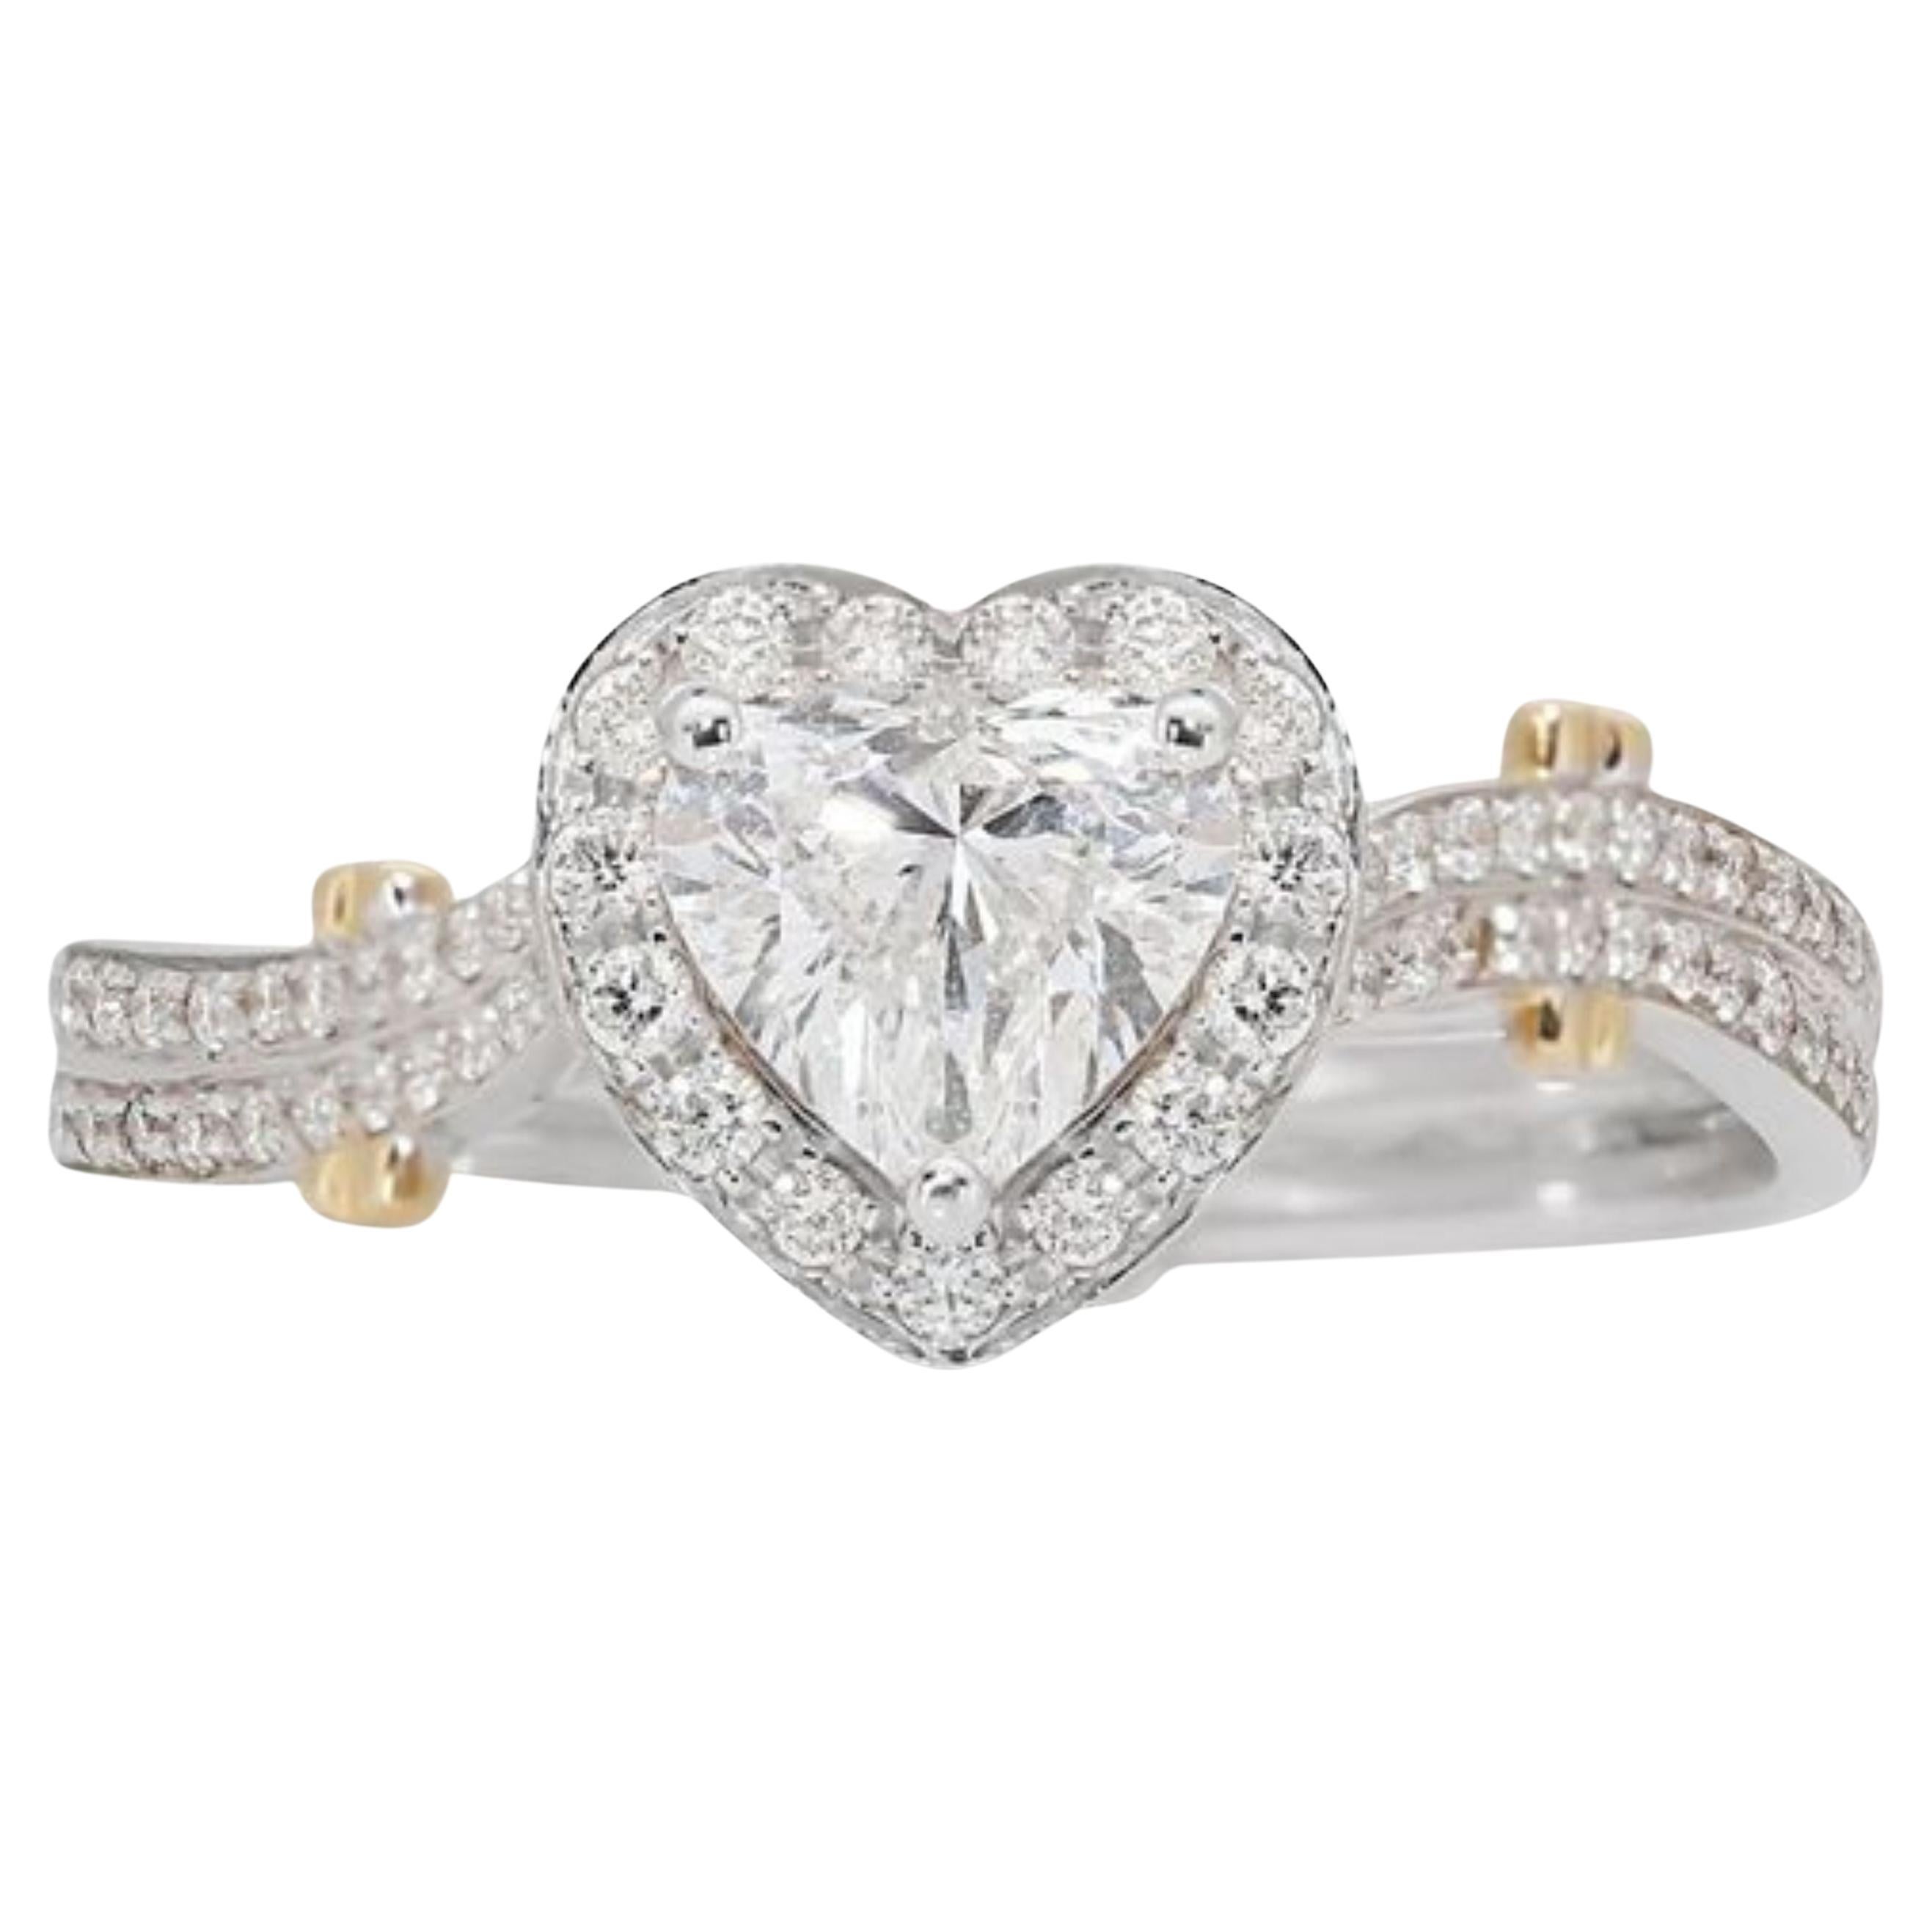 18K White & Yellow Gold Heart Shape Ring with 0.24 Ct Natural Diamonds, GIA Cert